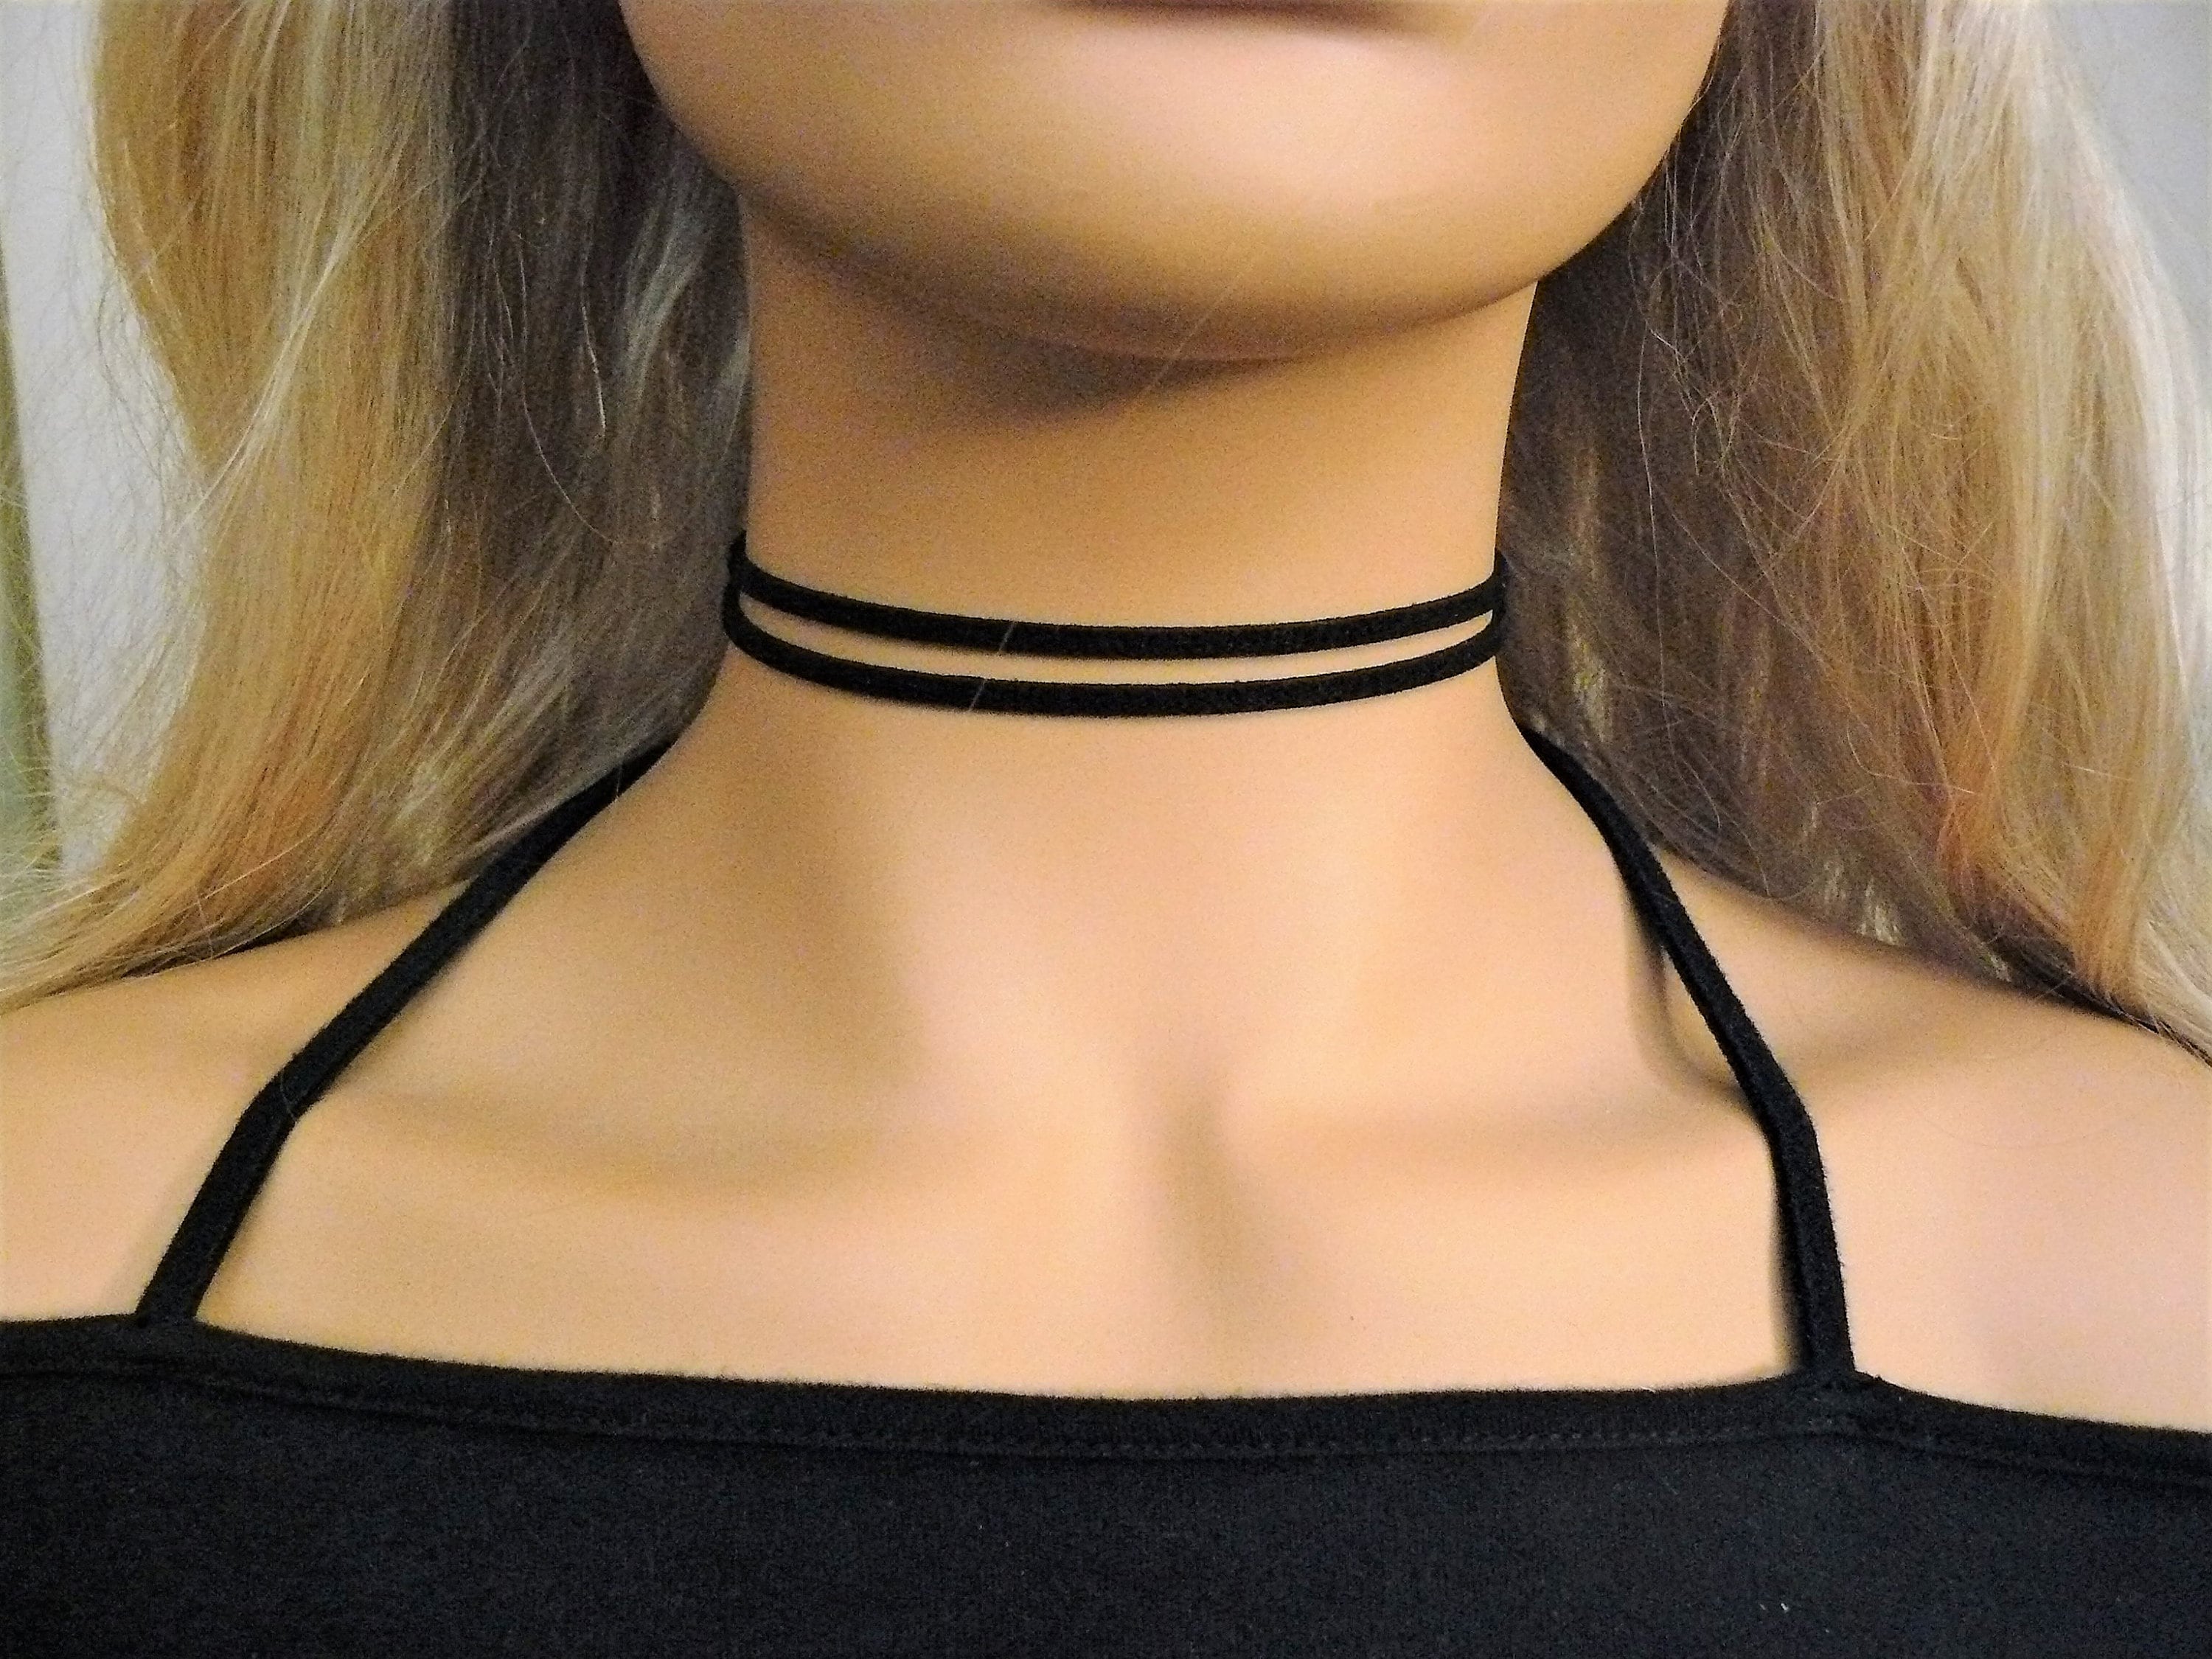 Sexy Choker, Black and Red Adjustable Leather Women Necklace, Thin Black  Choker, Plain Leather Necklace, Everyday Choker Made to Size Gift 